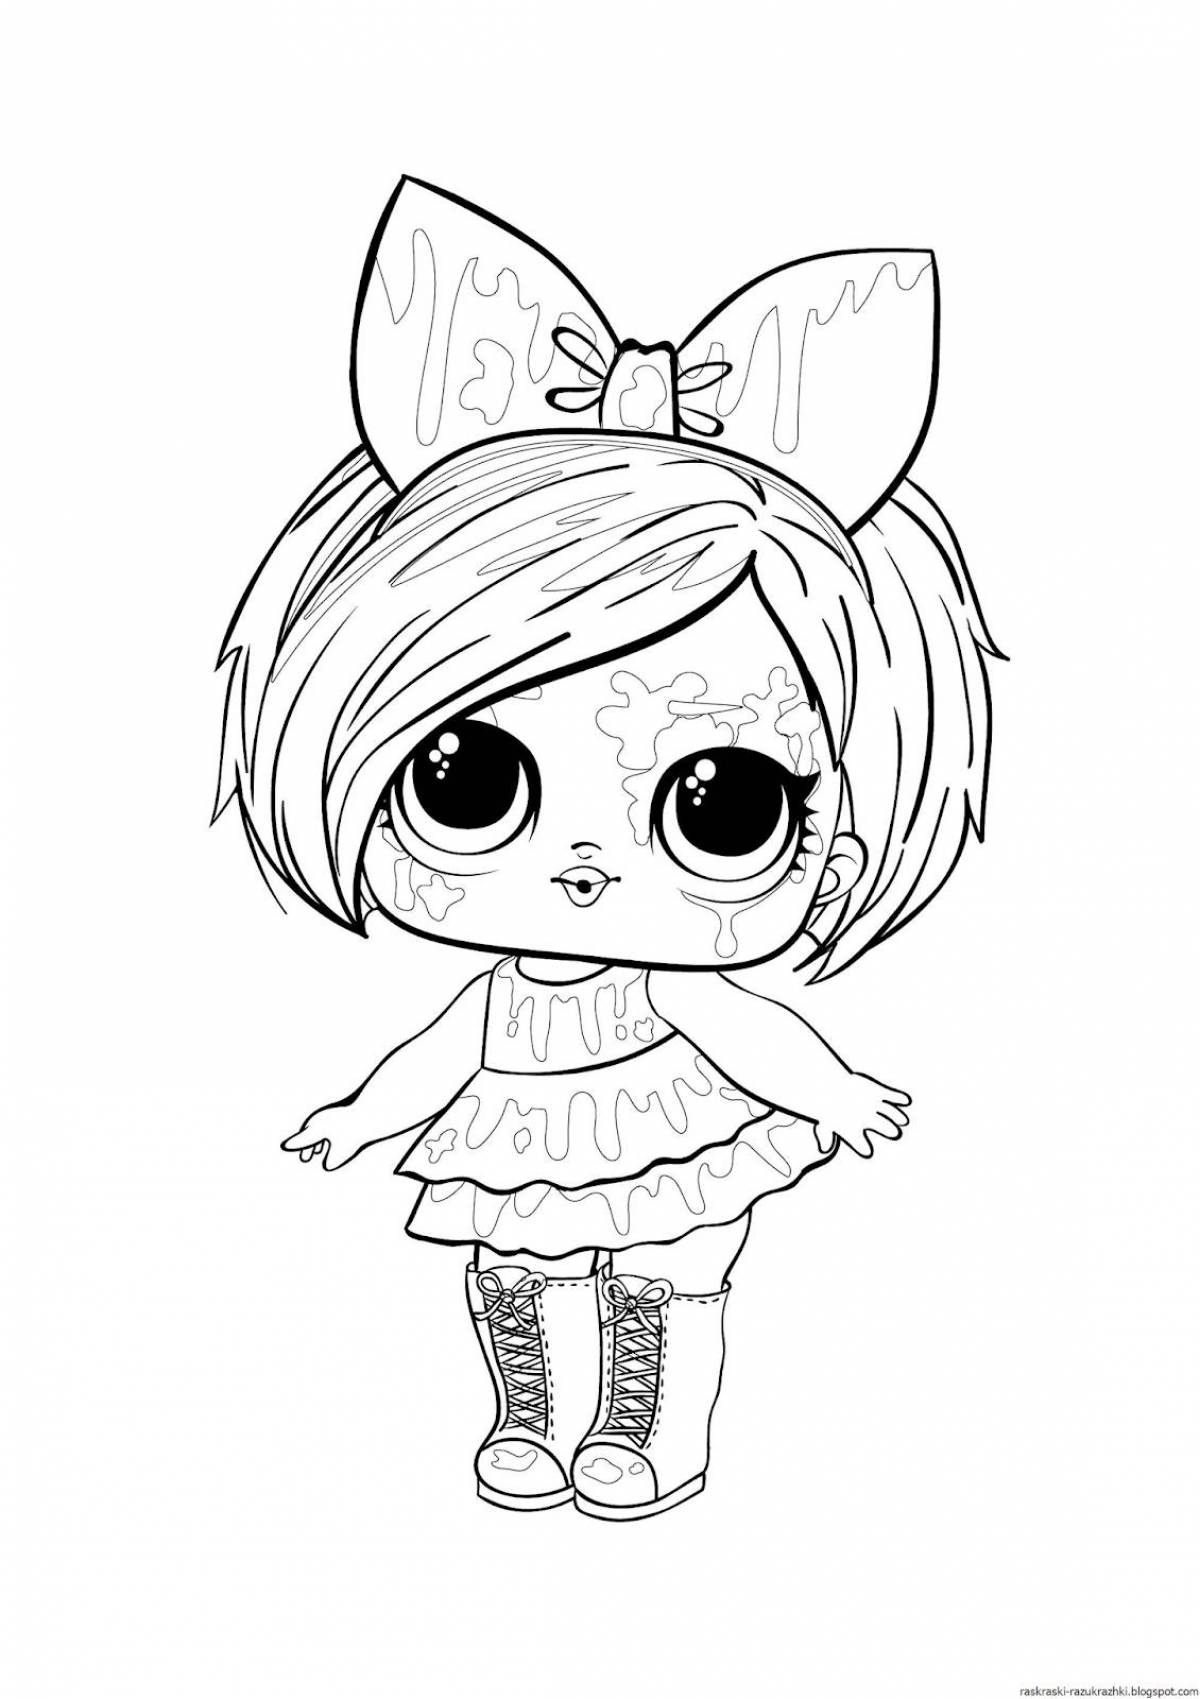 Fairytale coloring doll lol print